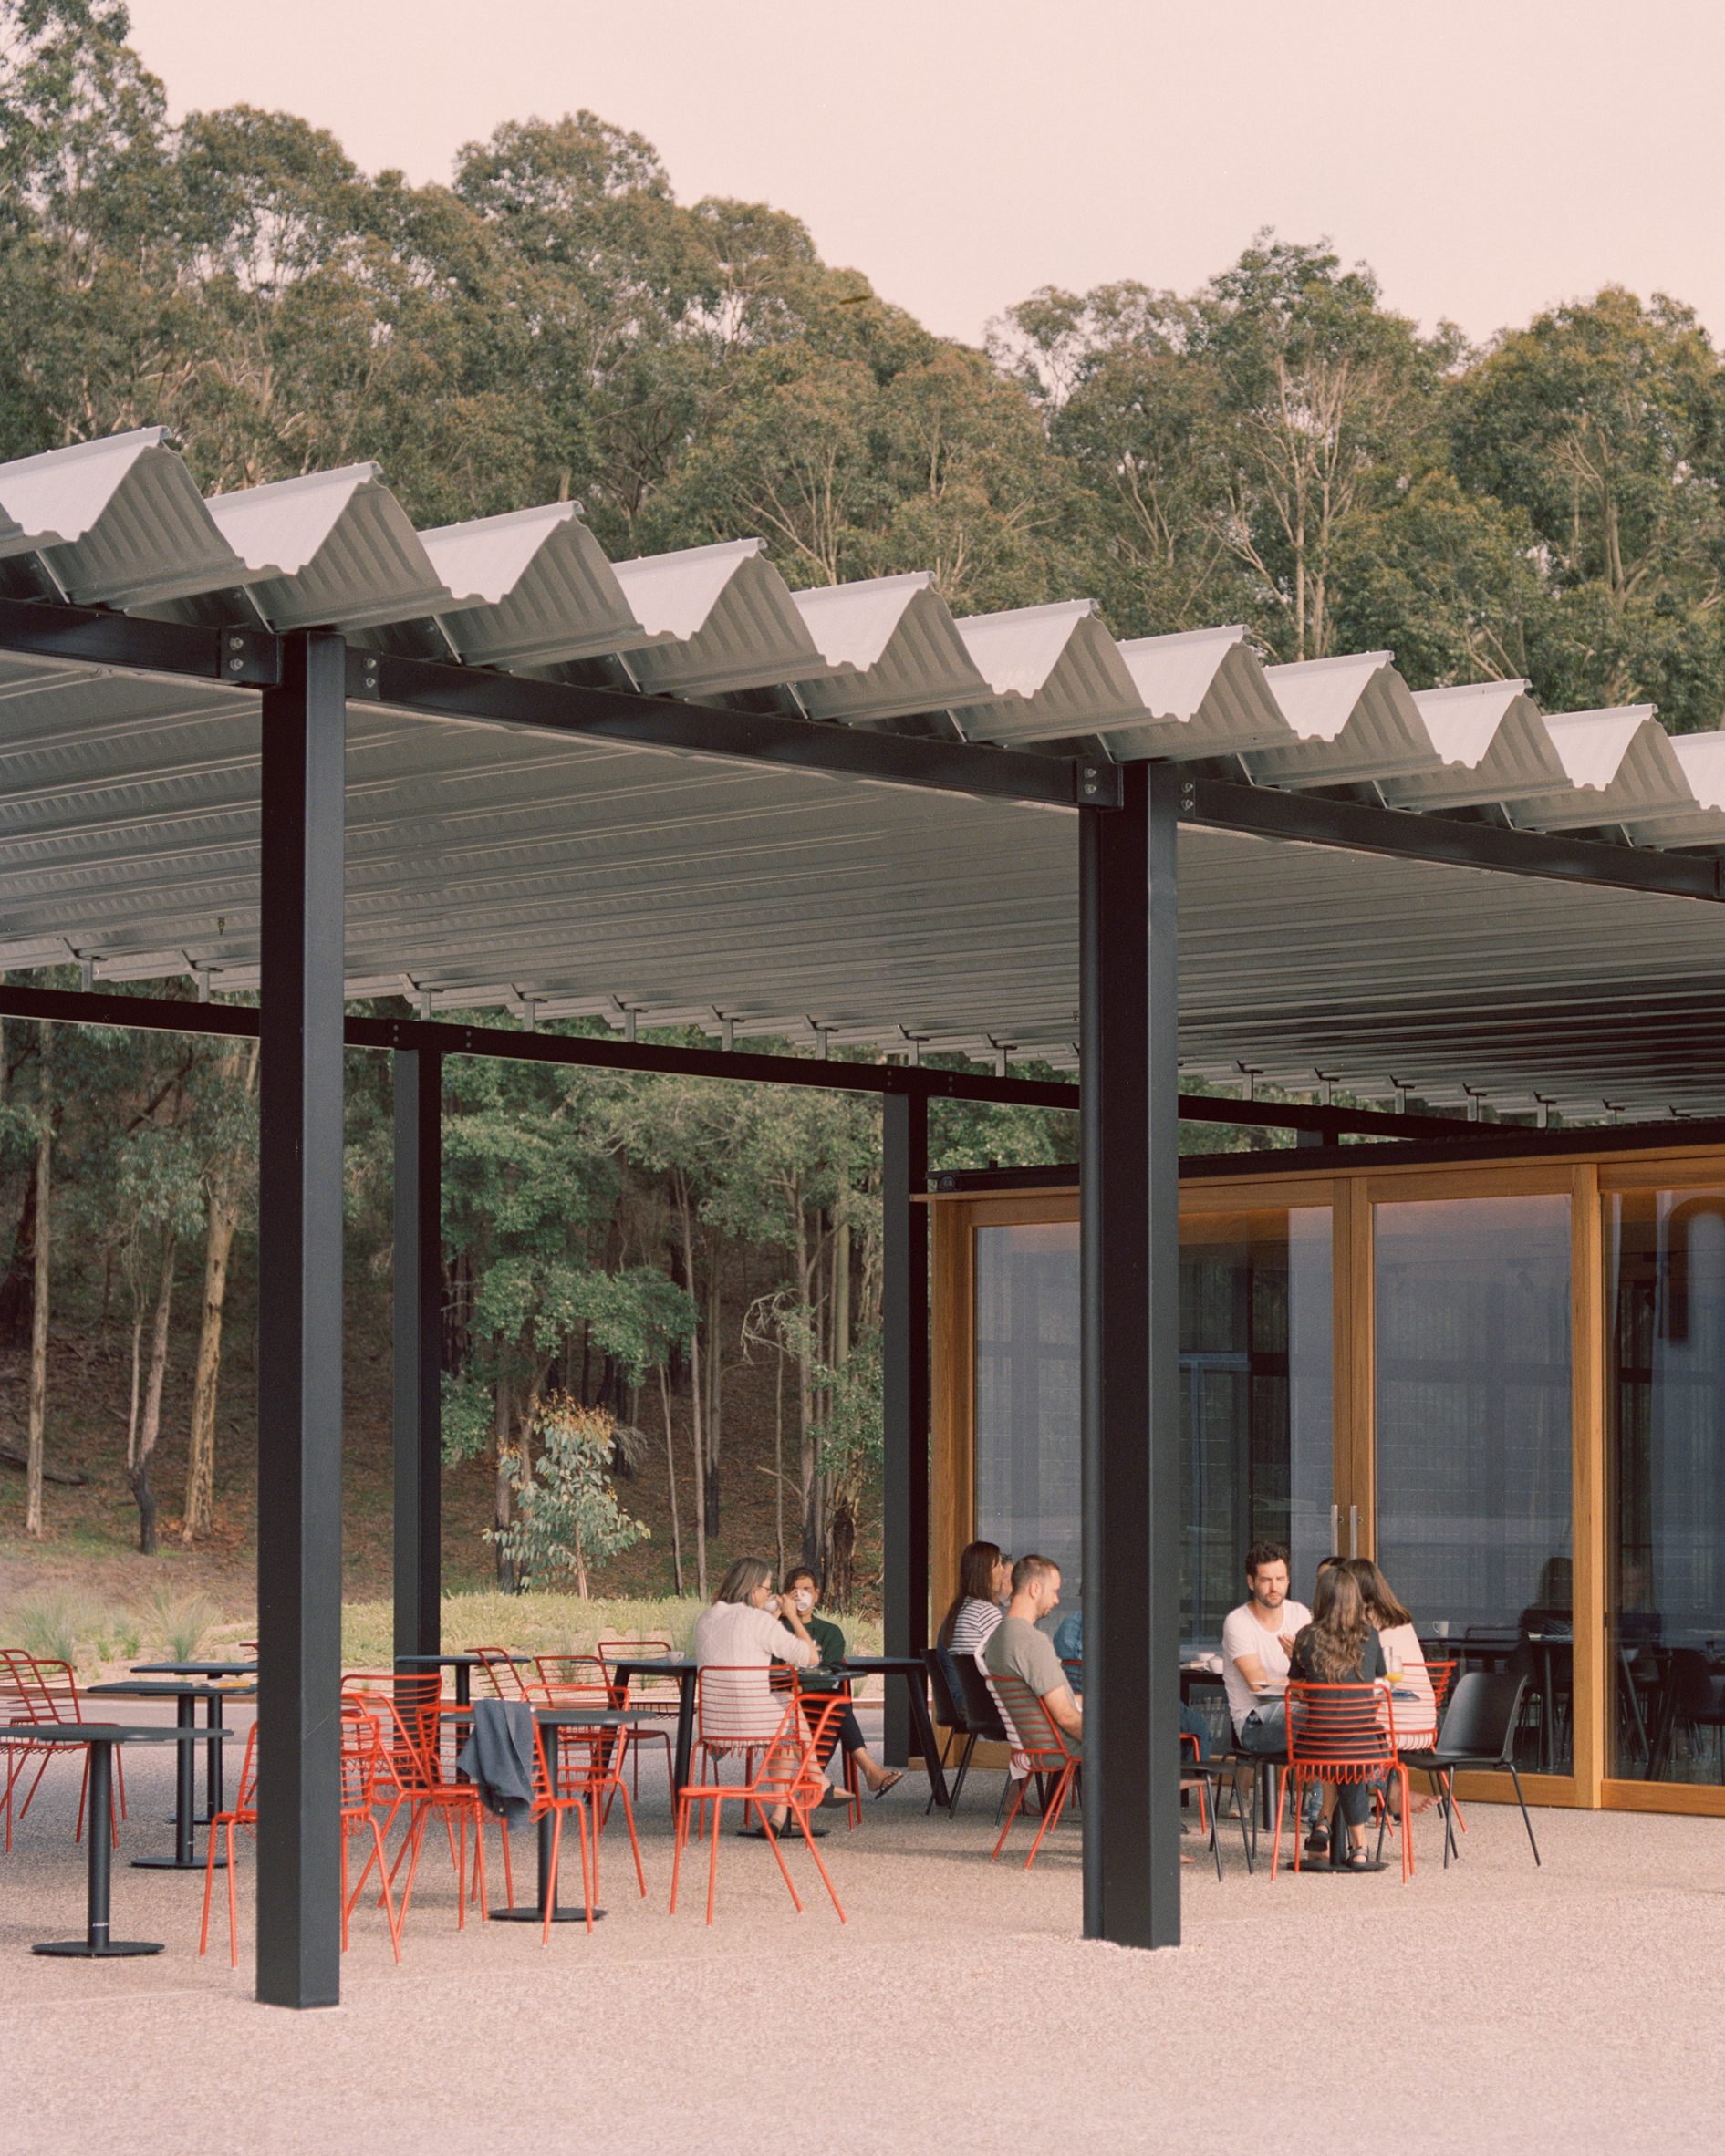 Image with people sitting under the wavy roof of the Bundanon Art Museums